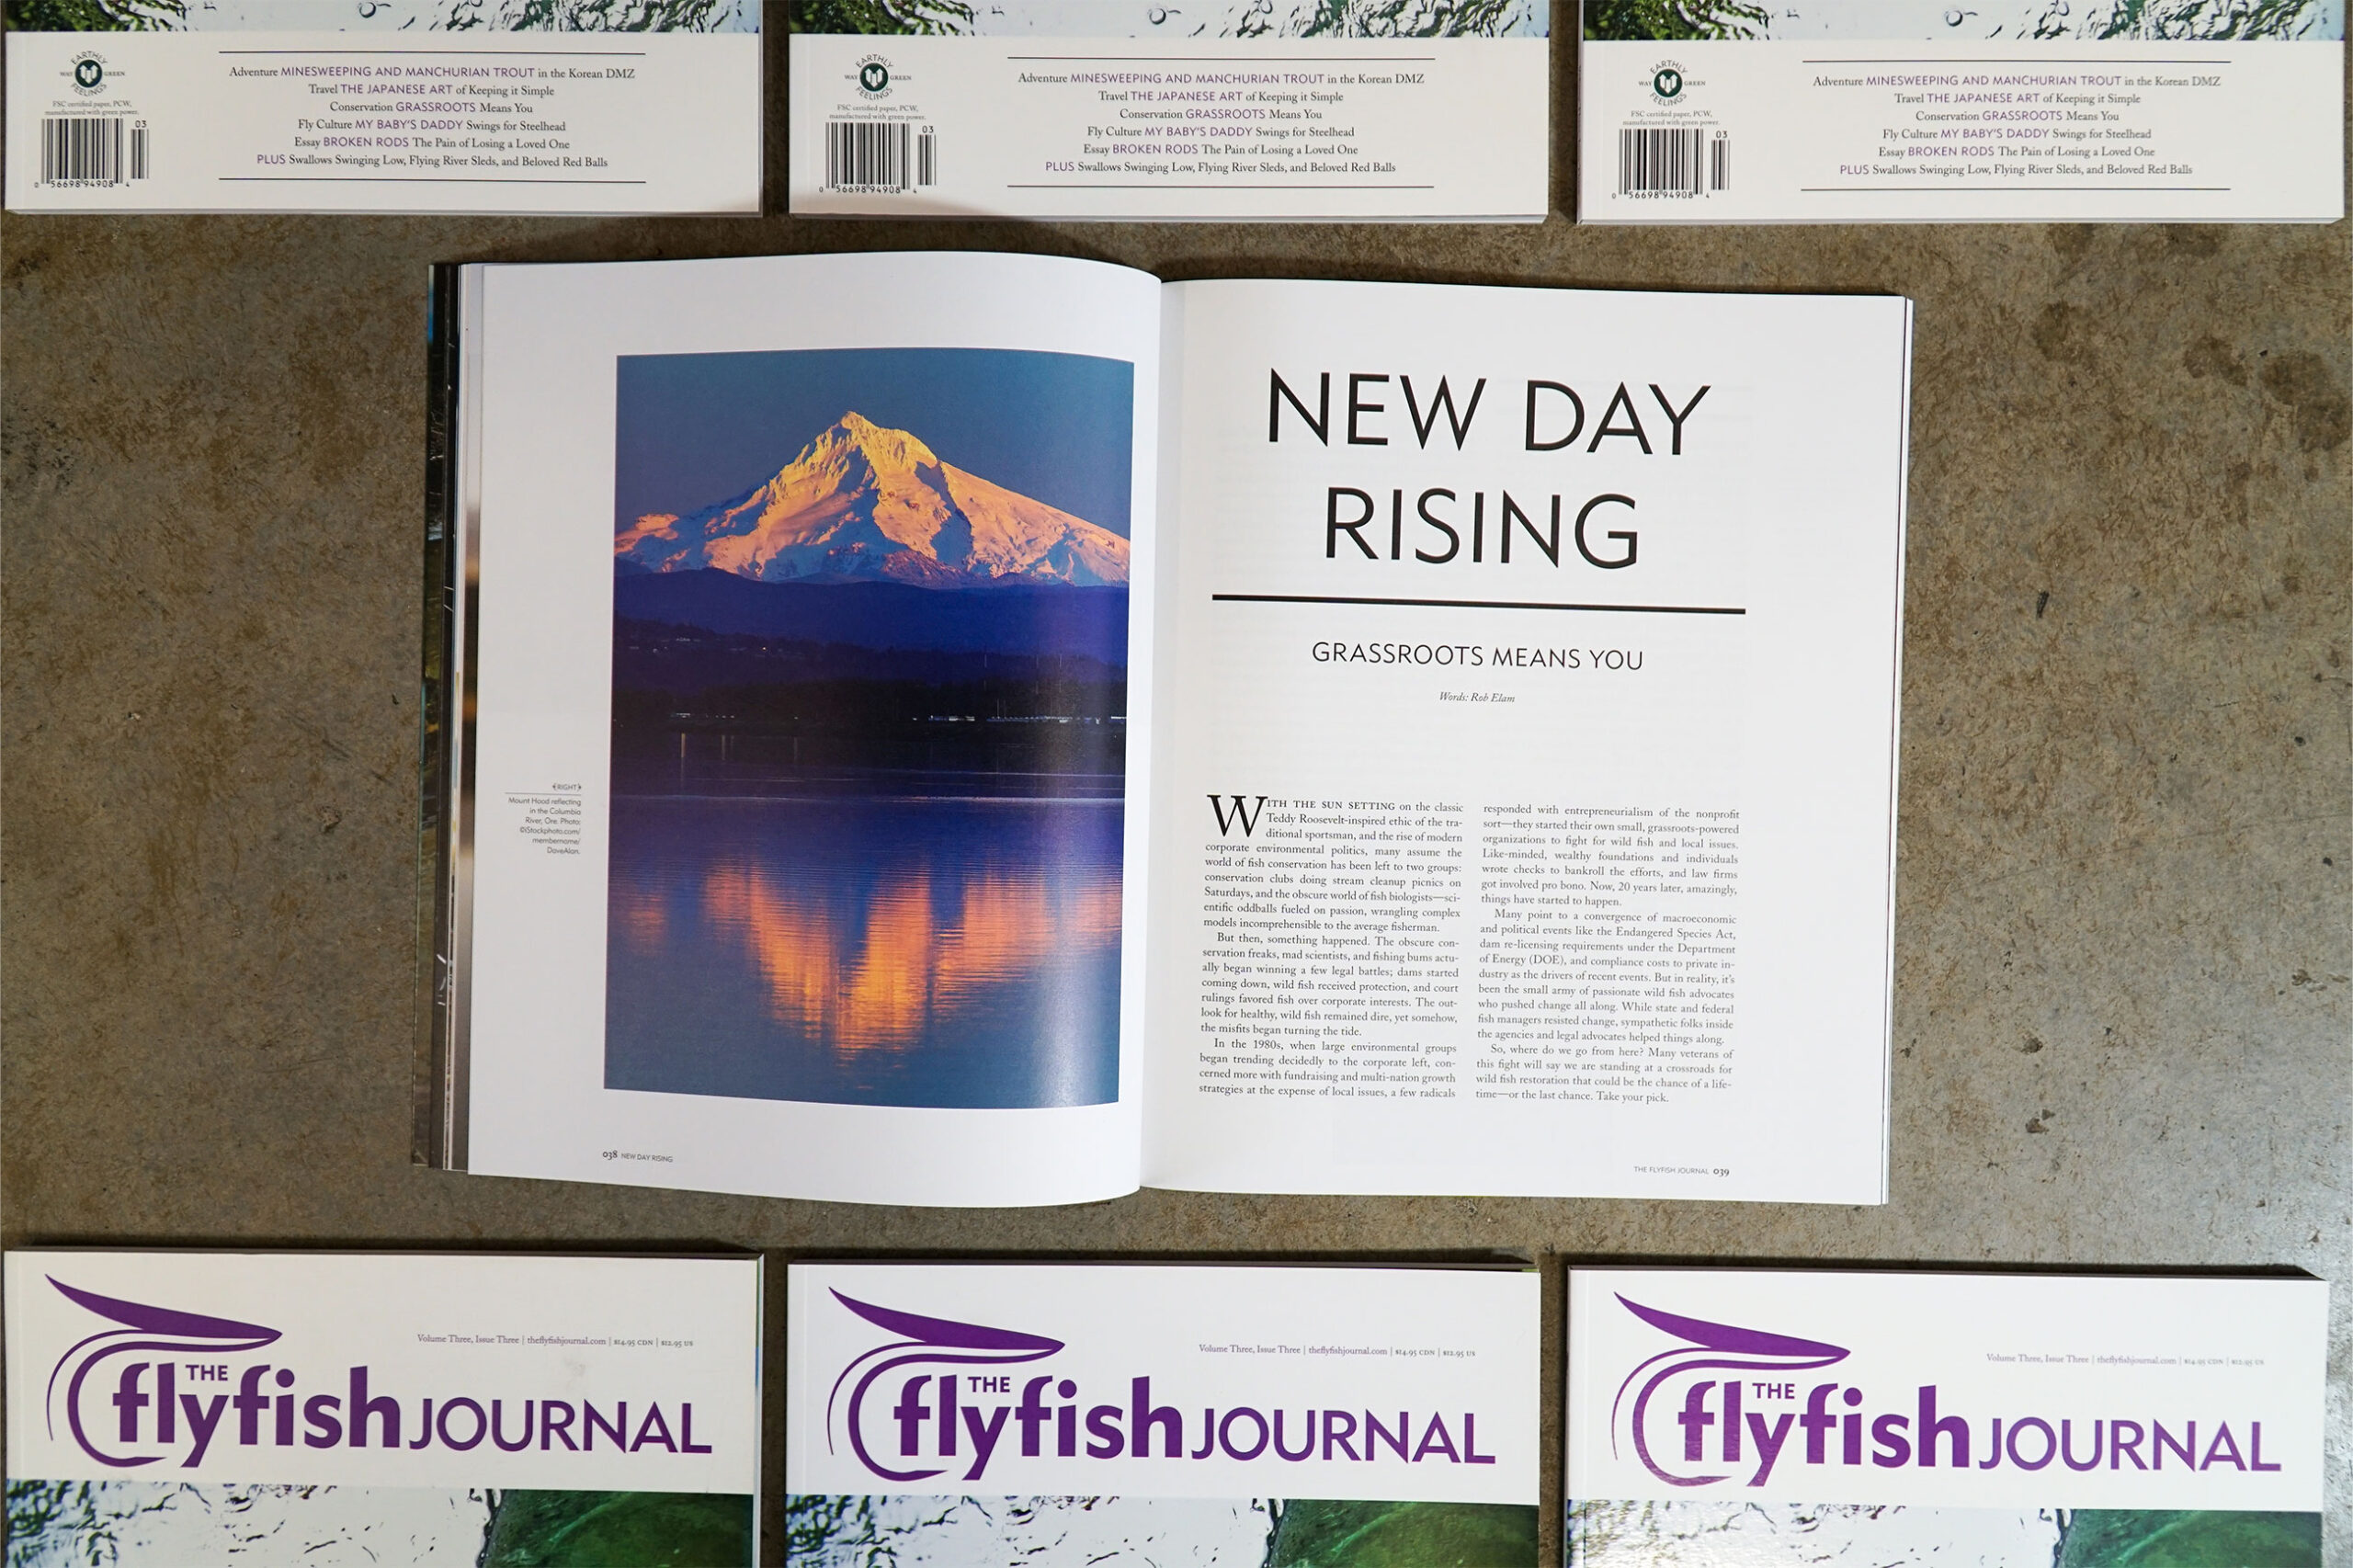 The Flyfish Journal Volume 3 Issue 3 Feature New Day Rising